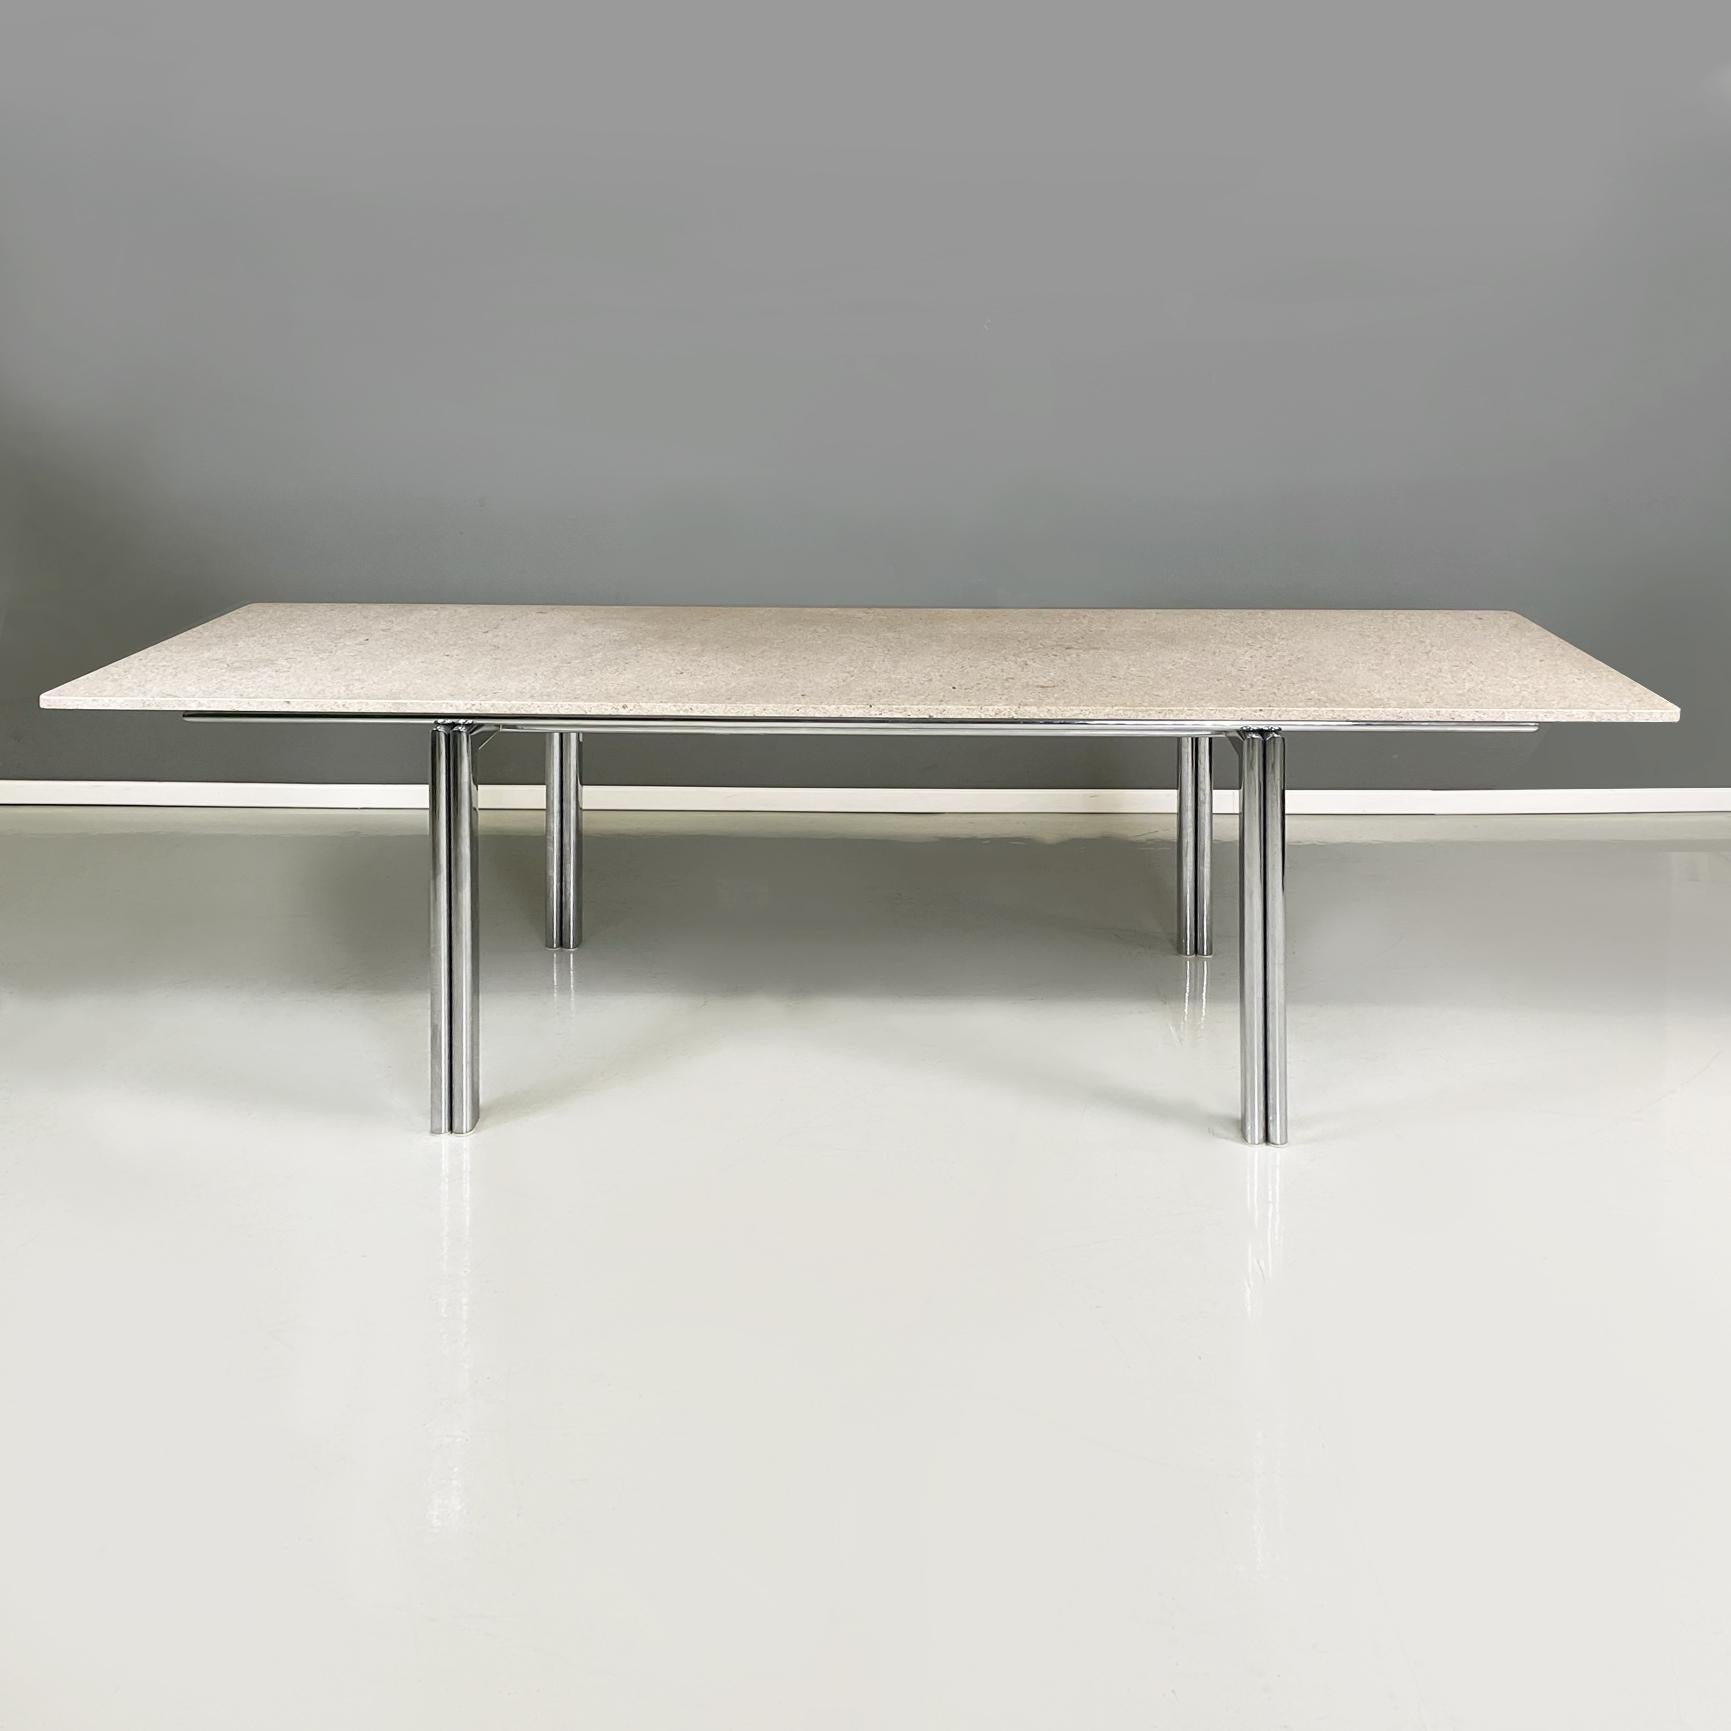 Italian modern Granite and steel dining table Alcinoo by Zeev Aram for Gavina, 1970s
Dining table mod. Alcinoo with rectangular top and rounded corners in granite. The structure is made of oval tubular chromed steel.
Produced by Gavina in 1970s and